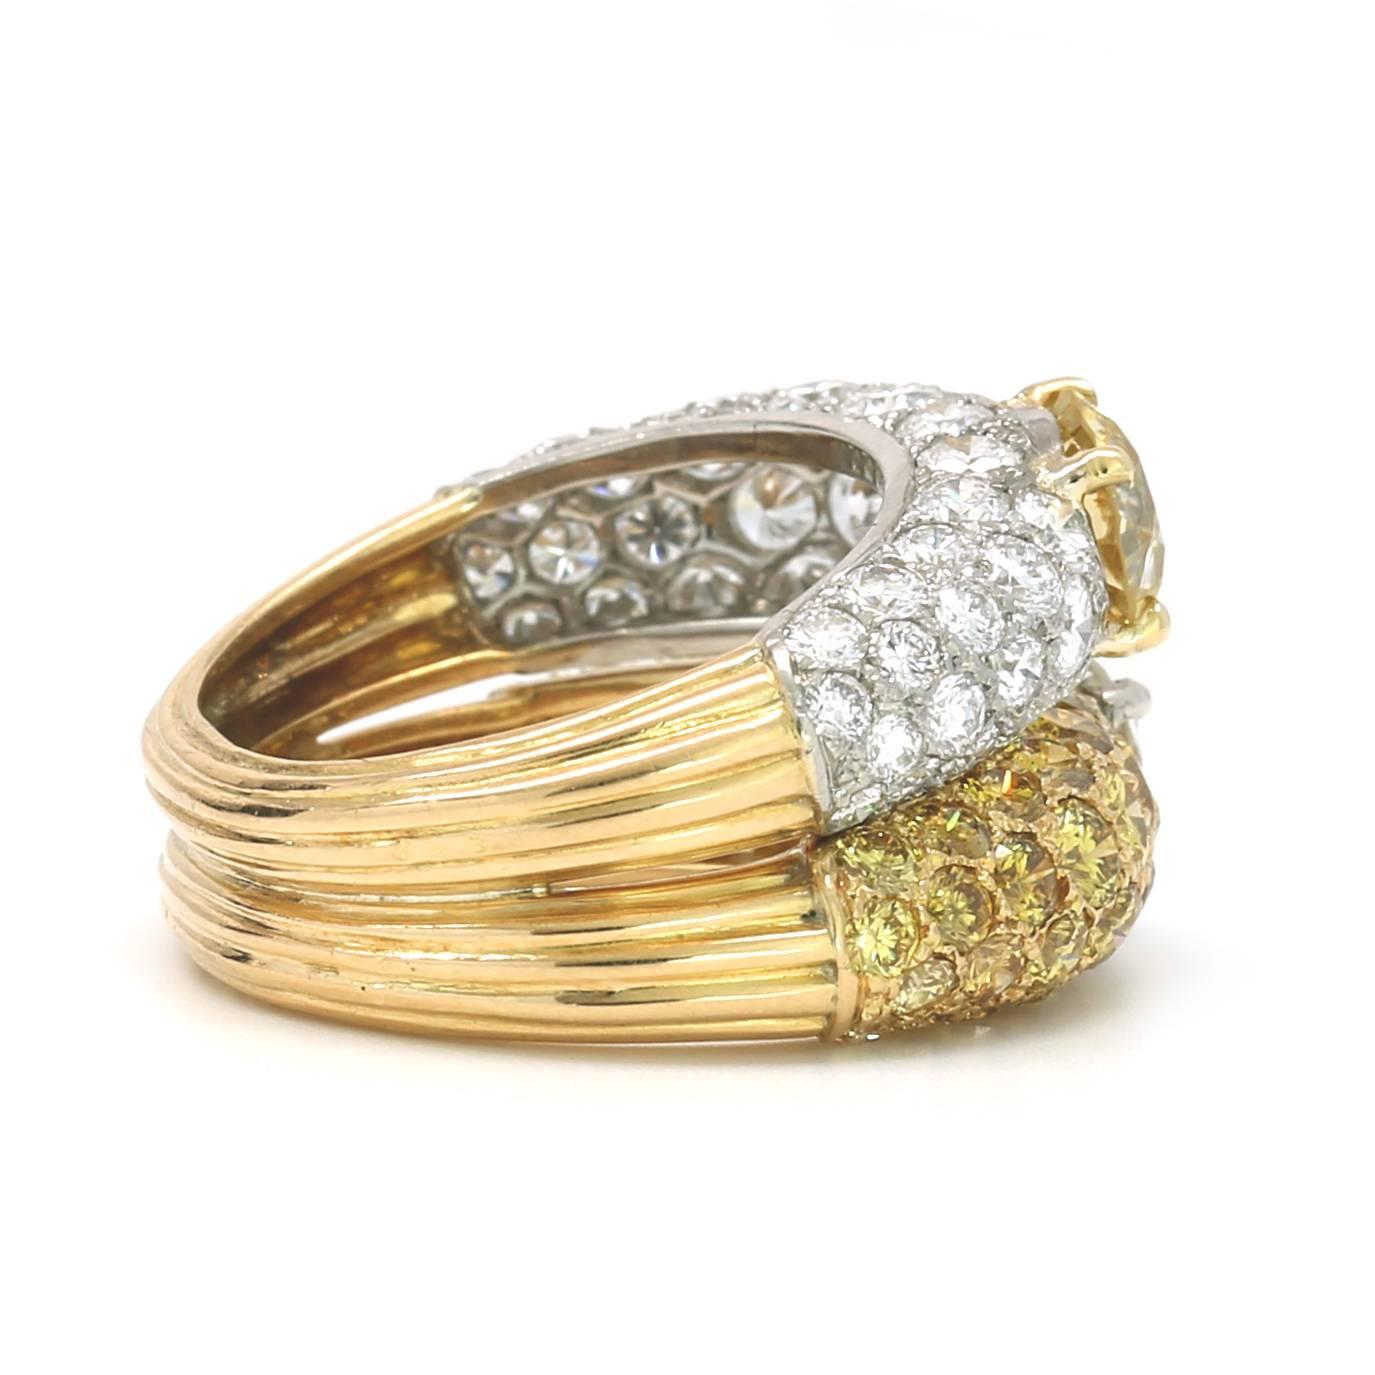 Cartier Fancy Yellow Diamond Ring In Excellent Condition For Sale In Aventura, FL